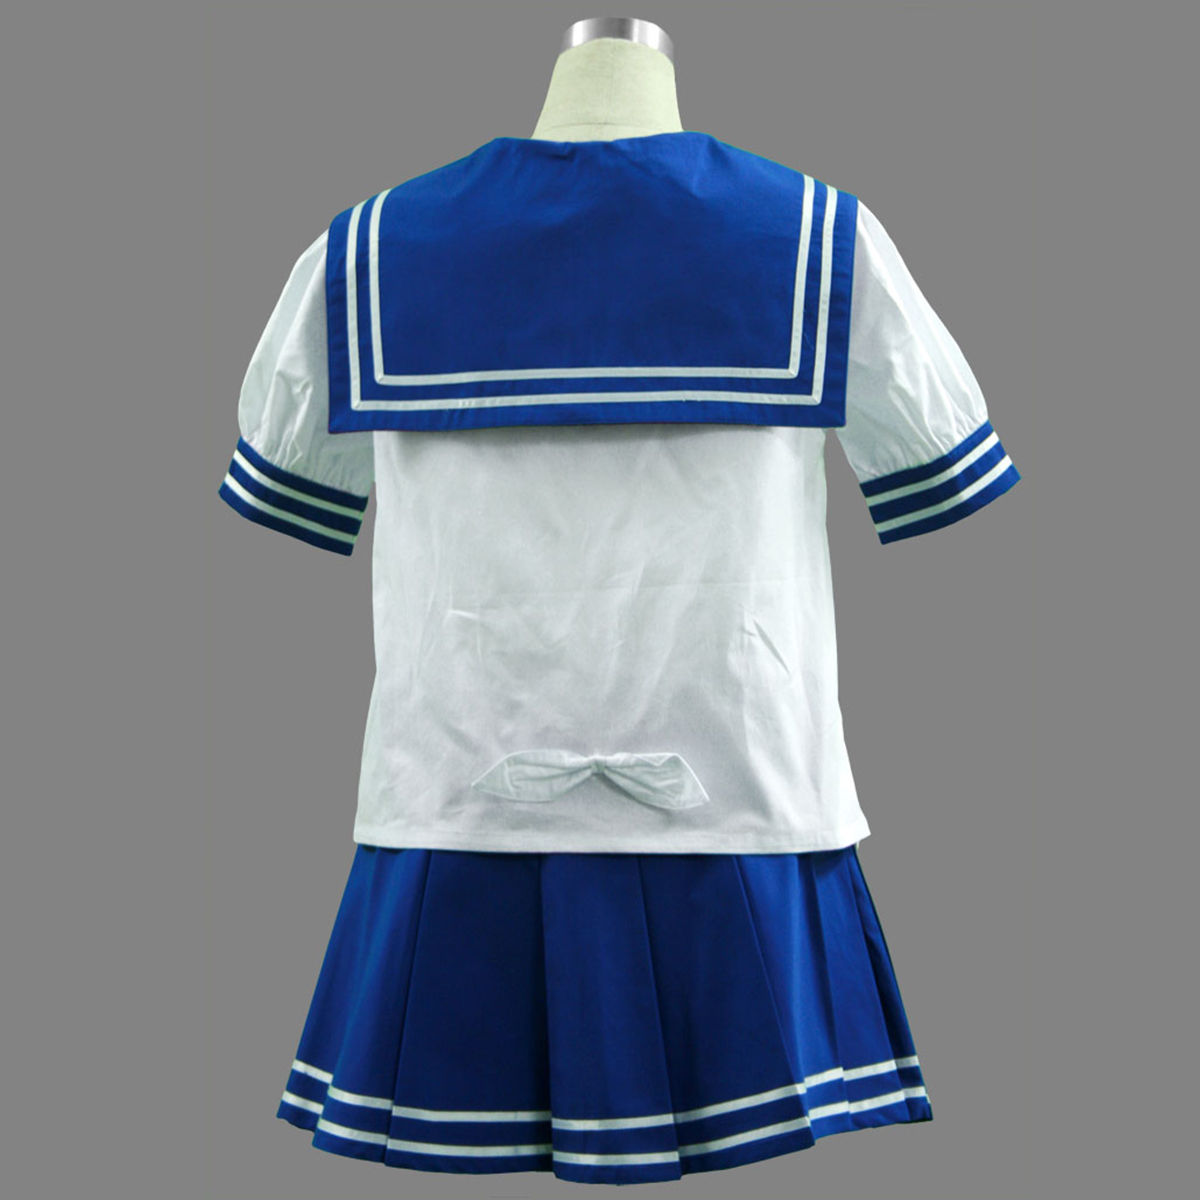 Lucky☆Star Hiiragi Kagami 1 Cosplay Costumes New Zealand Online Store